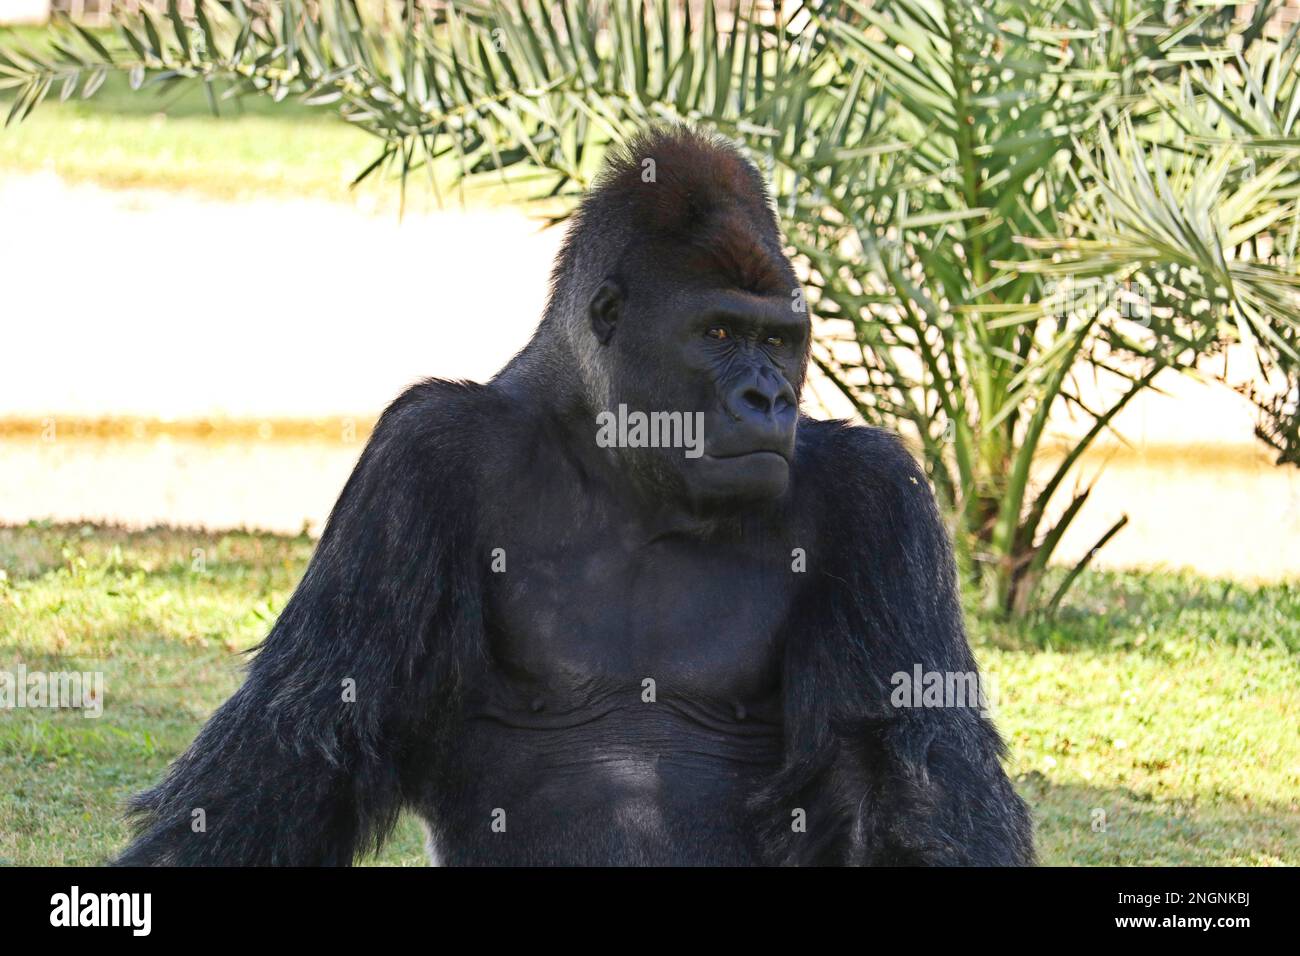 silverback gorilla male gets a portrait on a sunny day in the forest Stock Photo